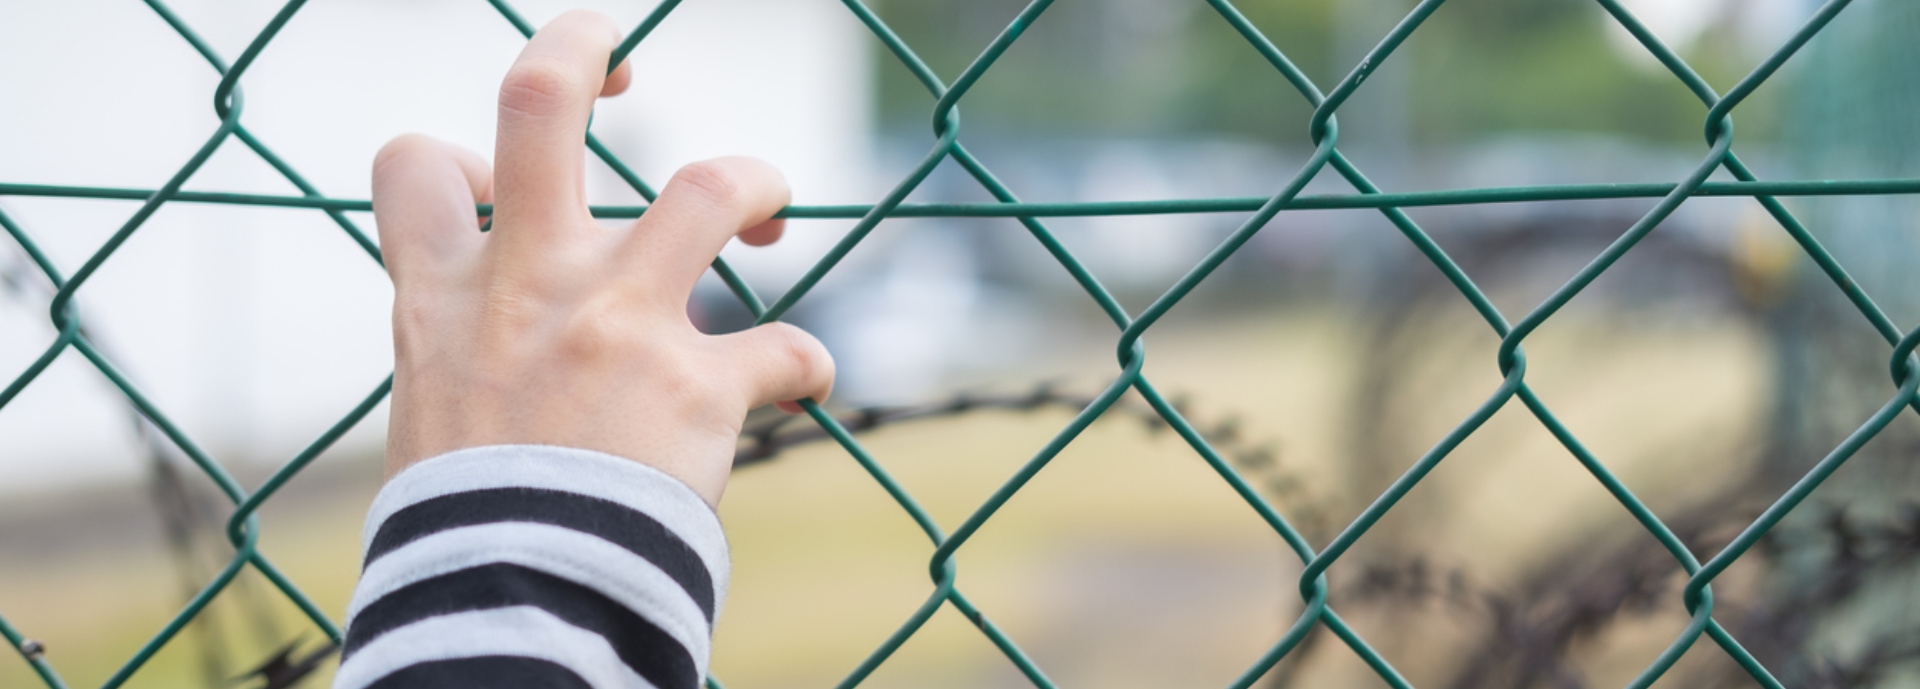 child's hands at fence